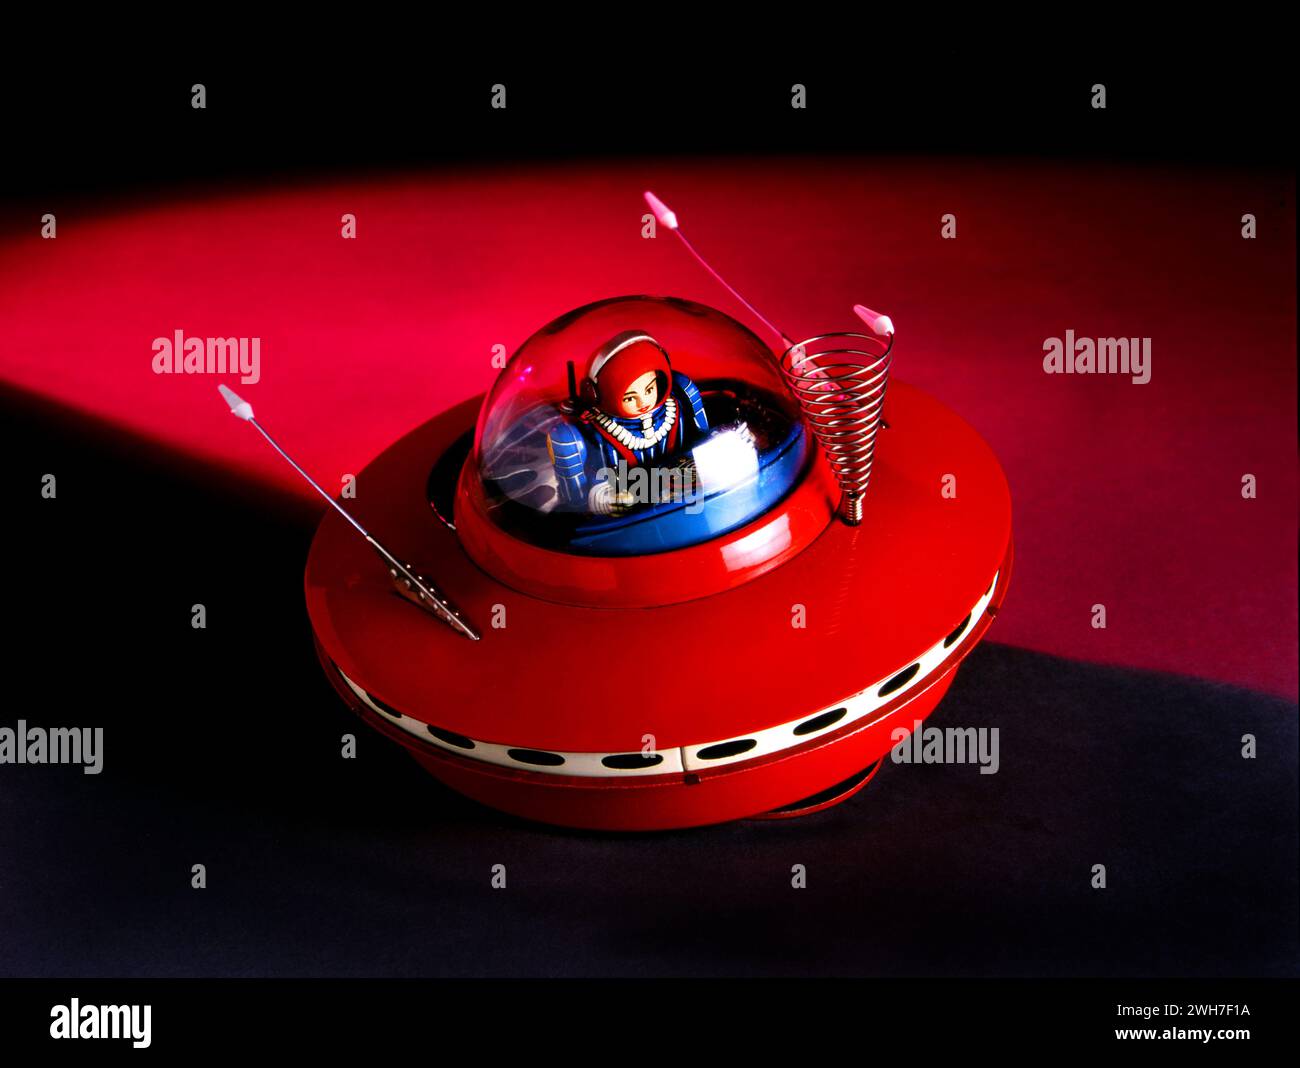 A red metal, vintage, antique flying saucer toy with pilot. Stylized studio photo. Stock Photo